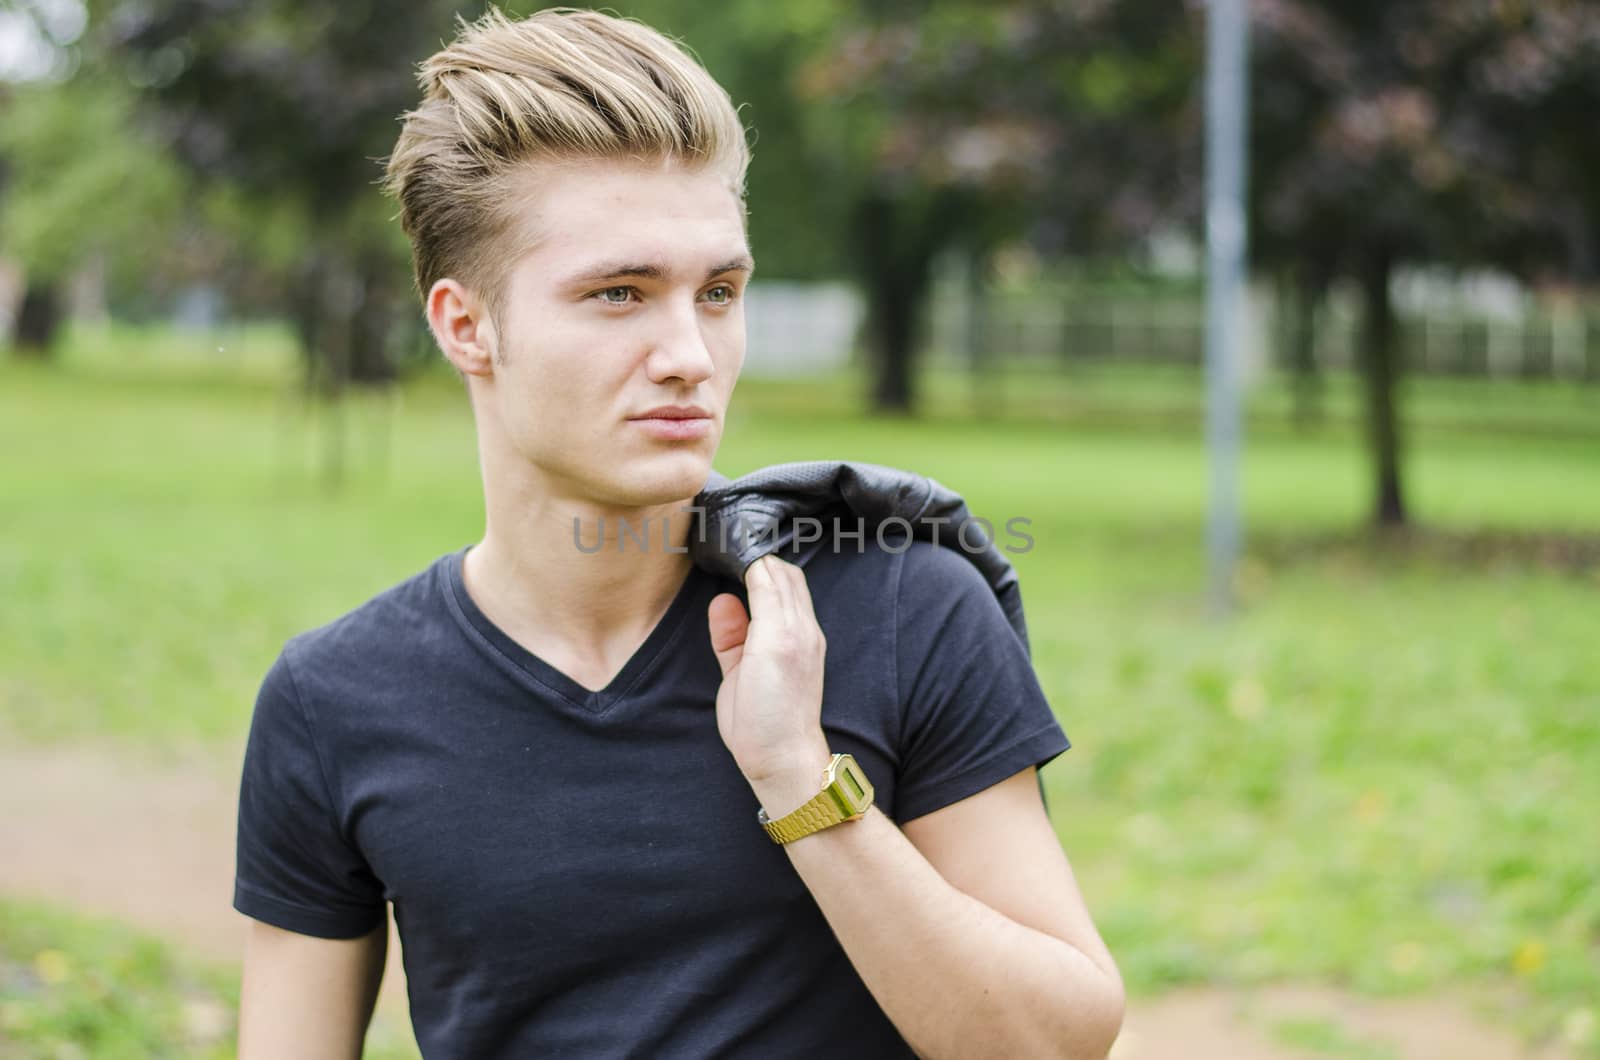 Attractive blond young man outdoors in a park, smiling